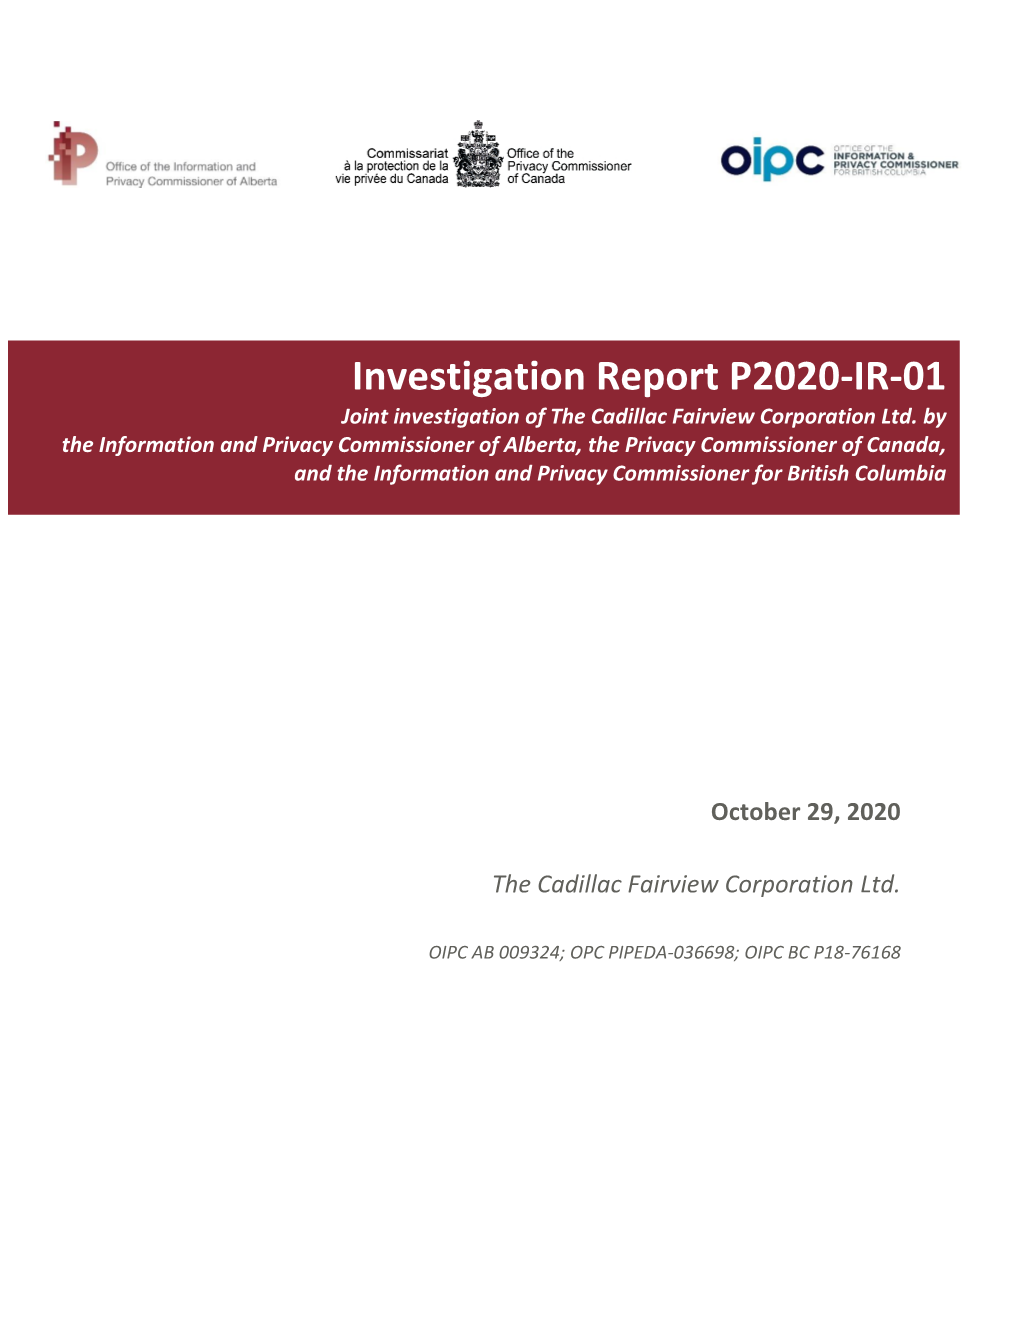 Investigation Report P2020-IR-01 Joint Investigation of the Cadillac Fairview Corporation Ltd